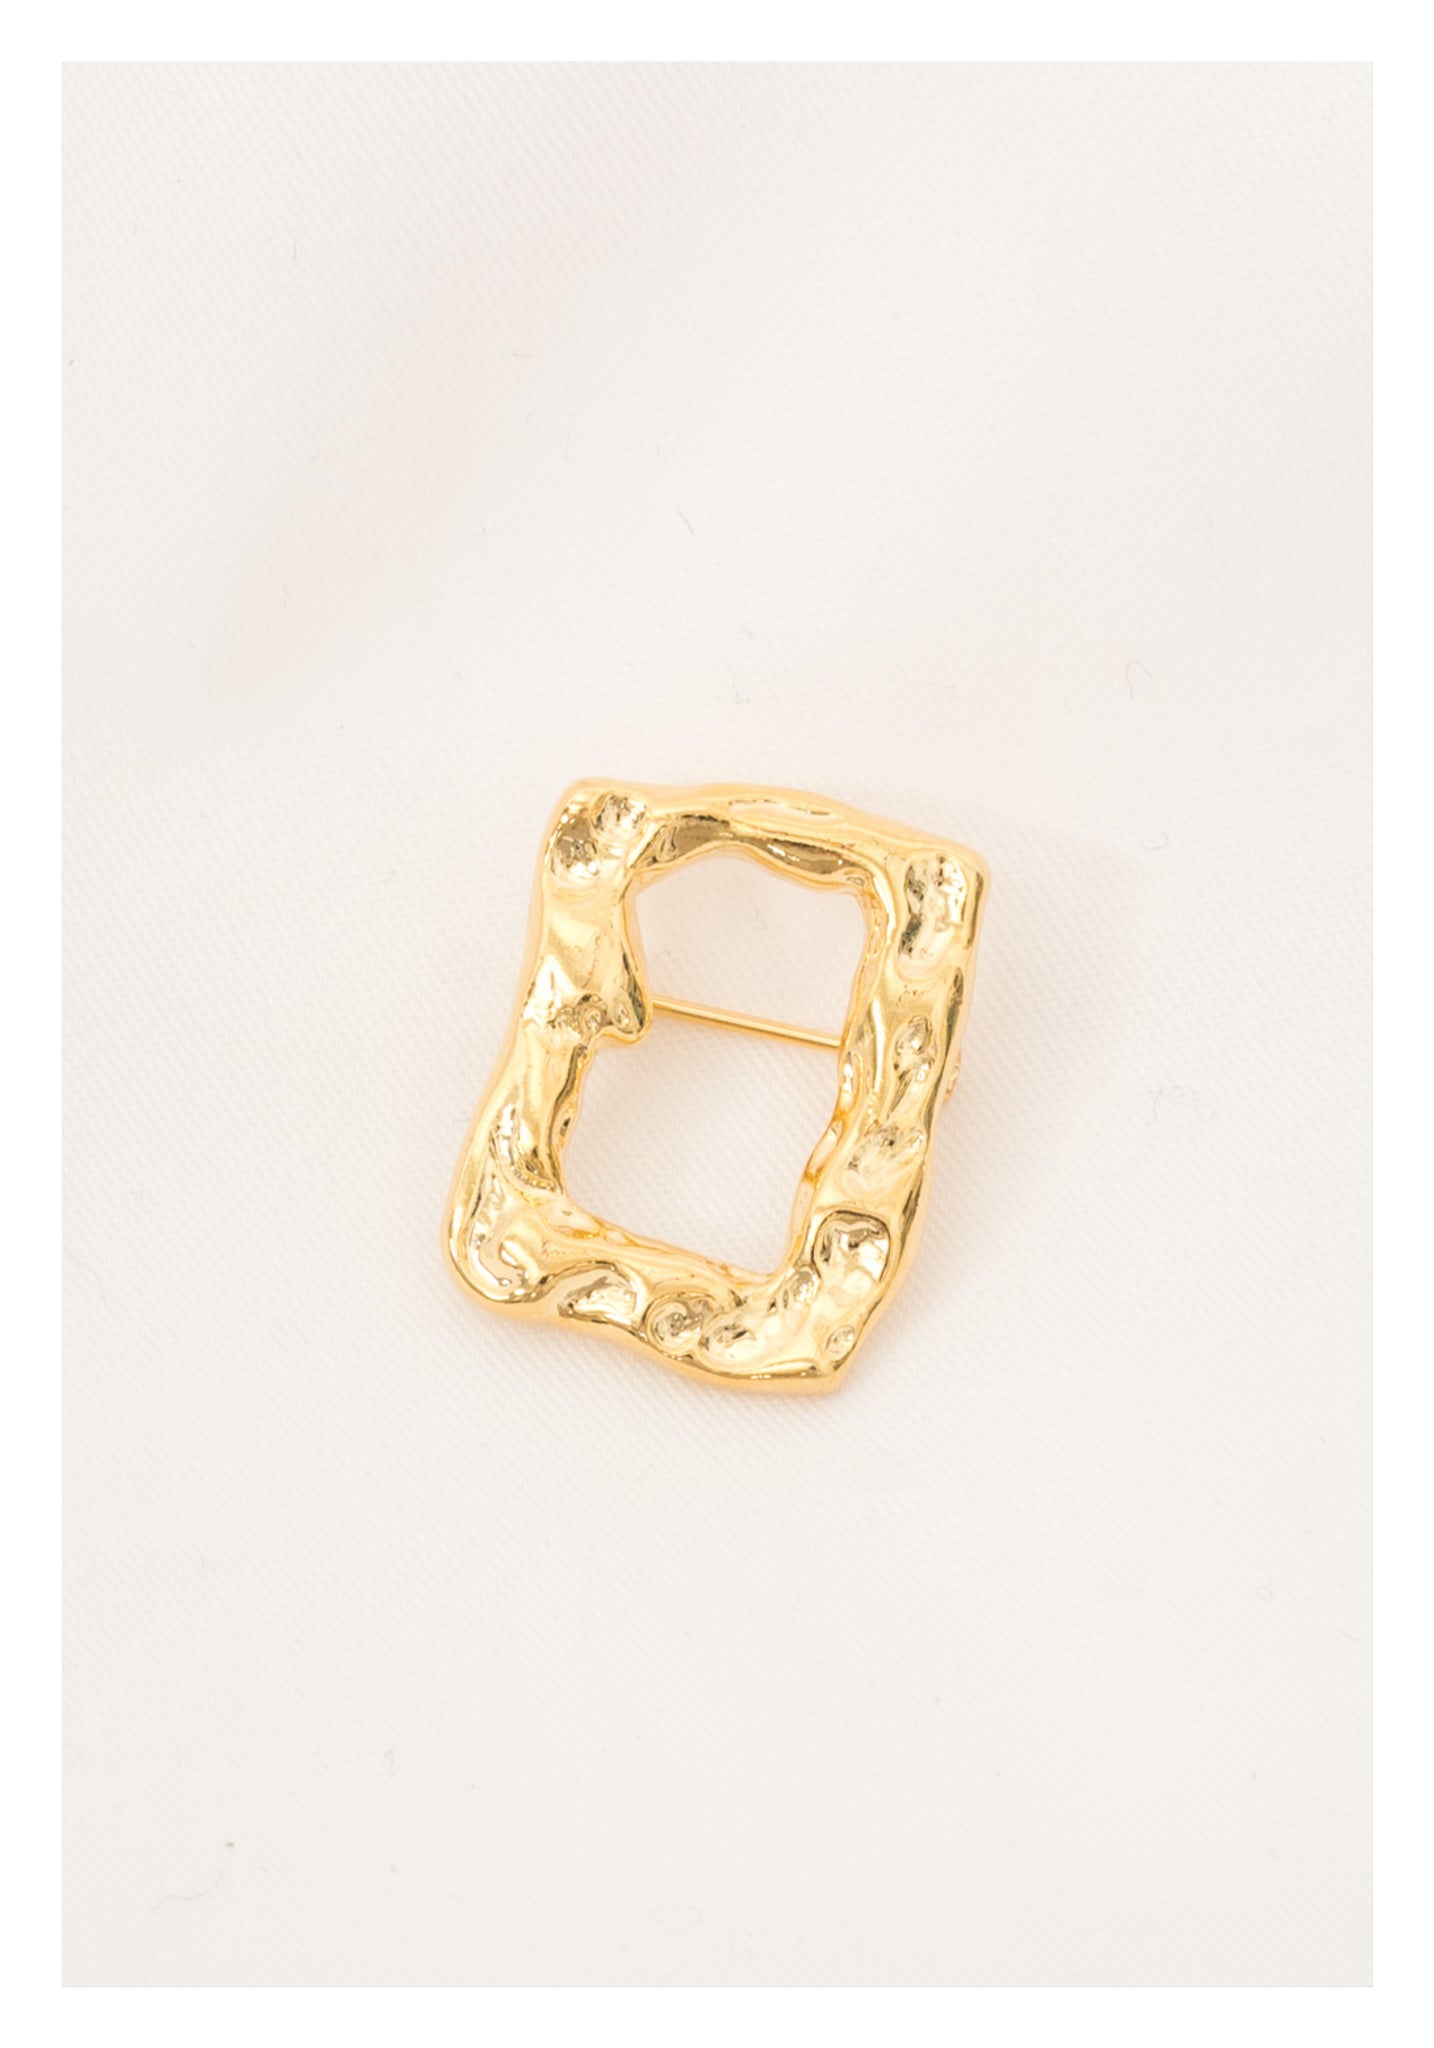 Texture Rectangle Frame Brooch - whoami